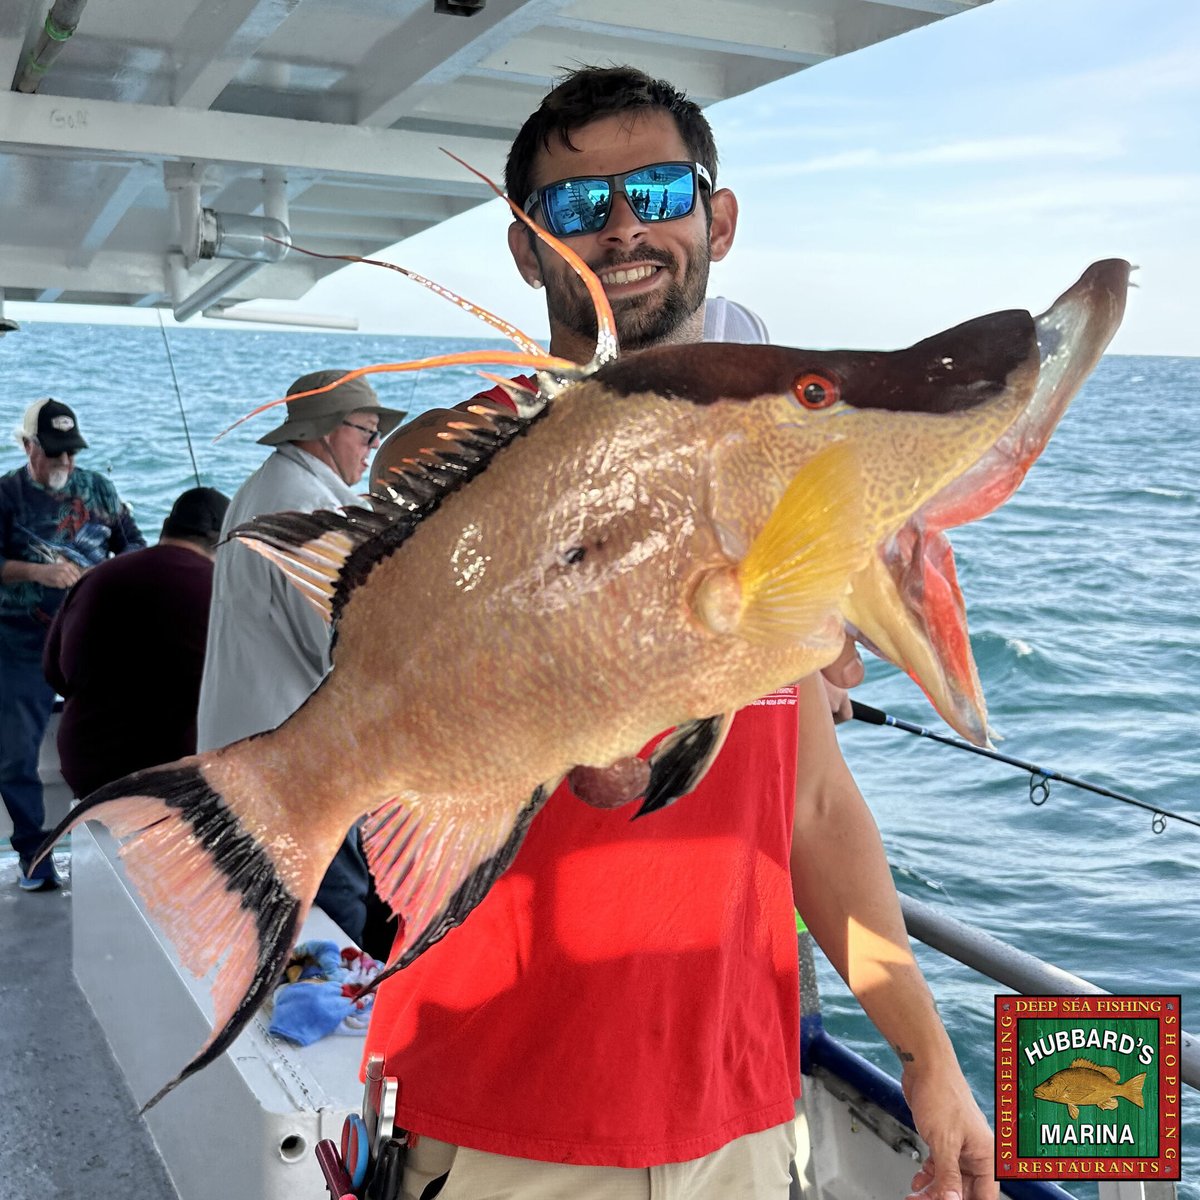 LOOK AT THAT HOGFISH!!! We are still chasing the Hogfish offshore! Come and catch some up with us!
#deepseafishing #offshorefishing #hogfish #floridafishing